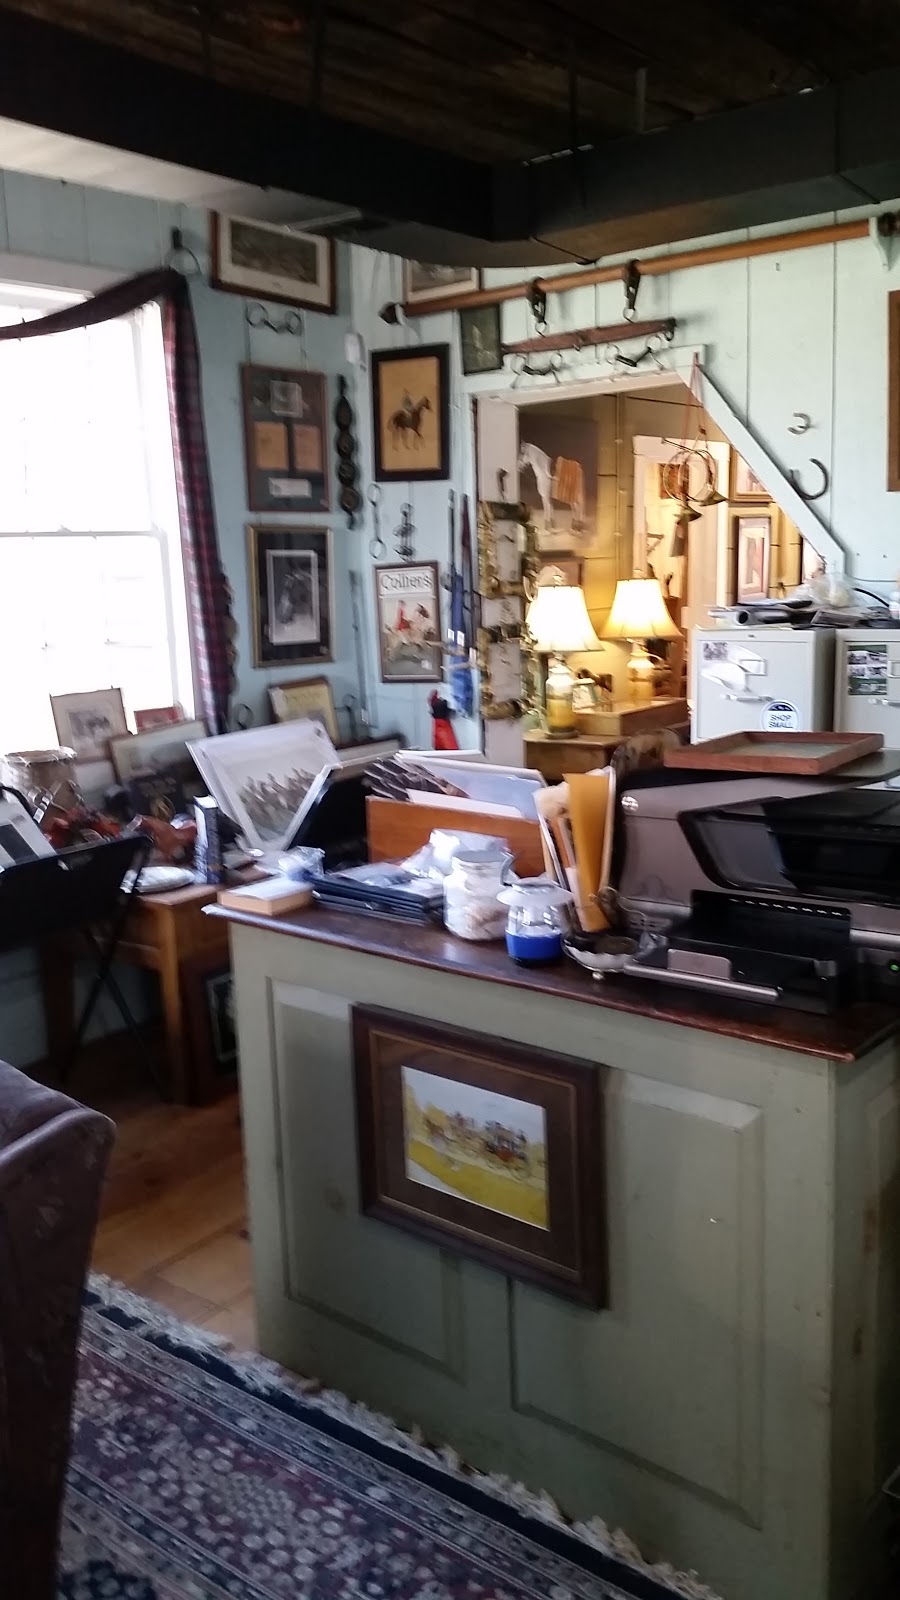 Foxglove Antiques | 62 S Rd, Somers, CT 06071 | Phone: (860) 749-2964